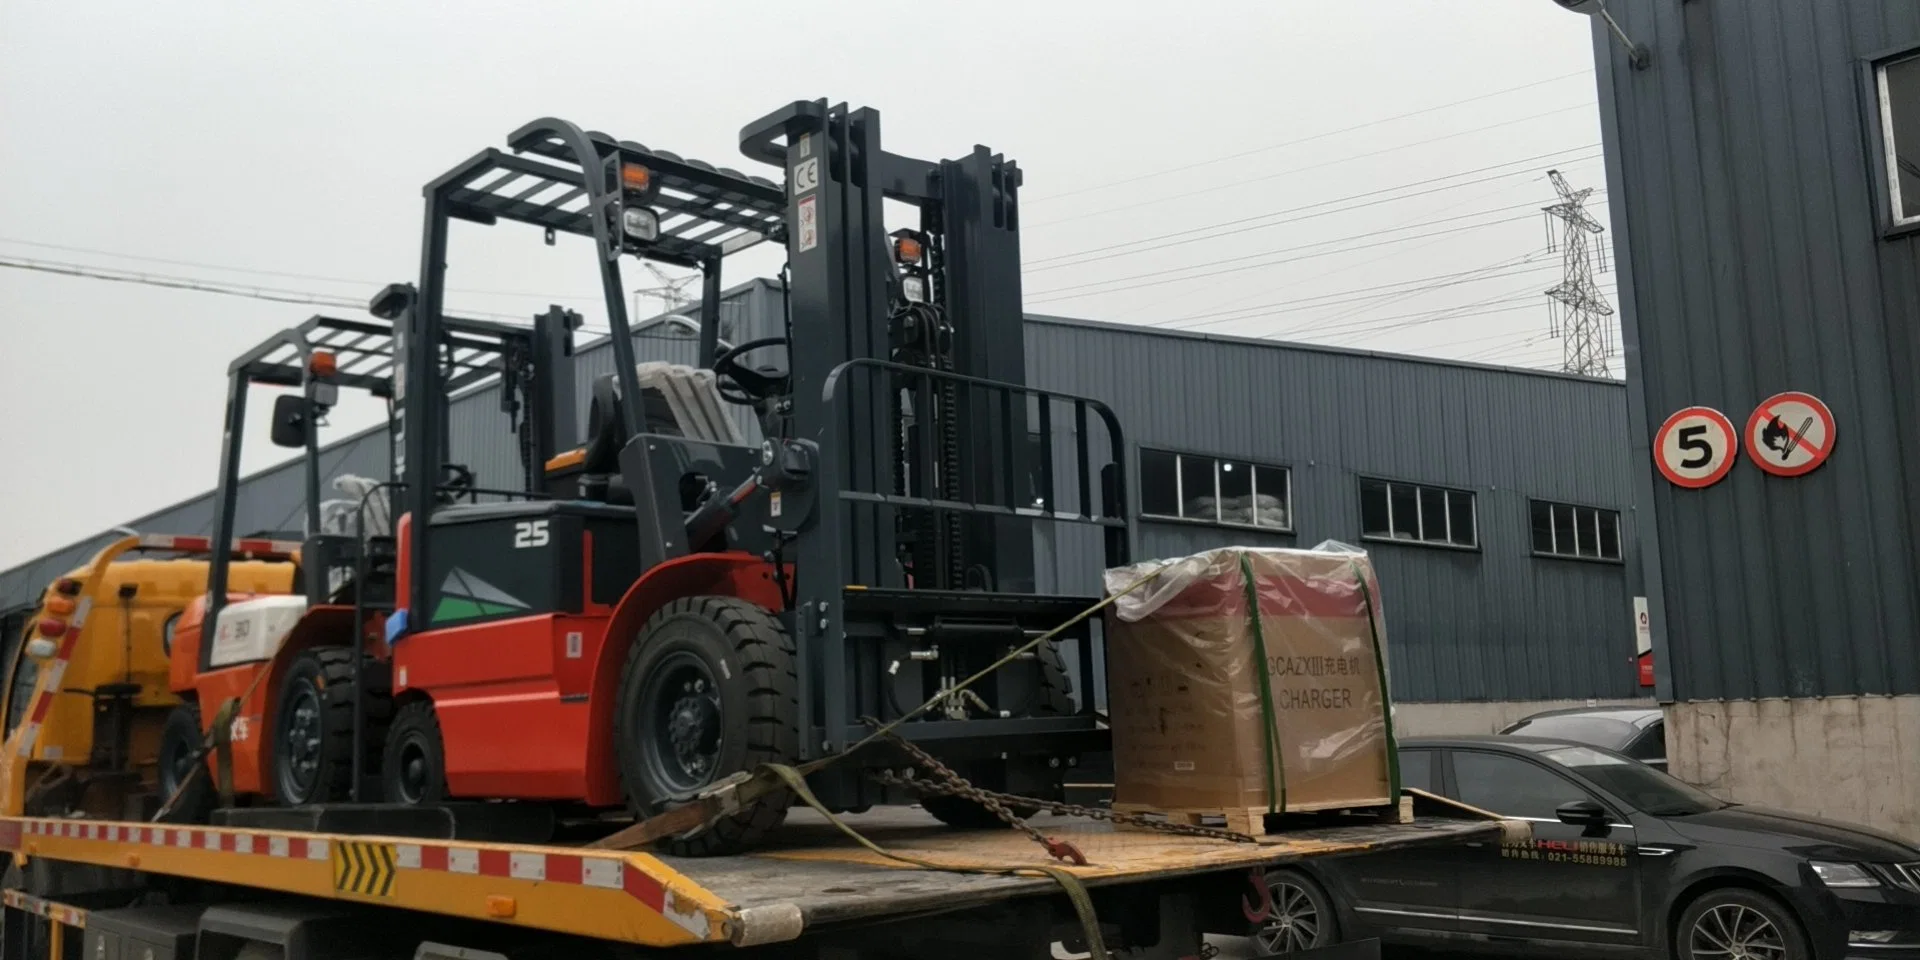 Heli 3.5 Ton Electric Lead-Acid Battery Forklift Trucks Cpd35 Sale in Kenya with Side Shift and Triple Mast